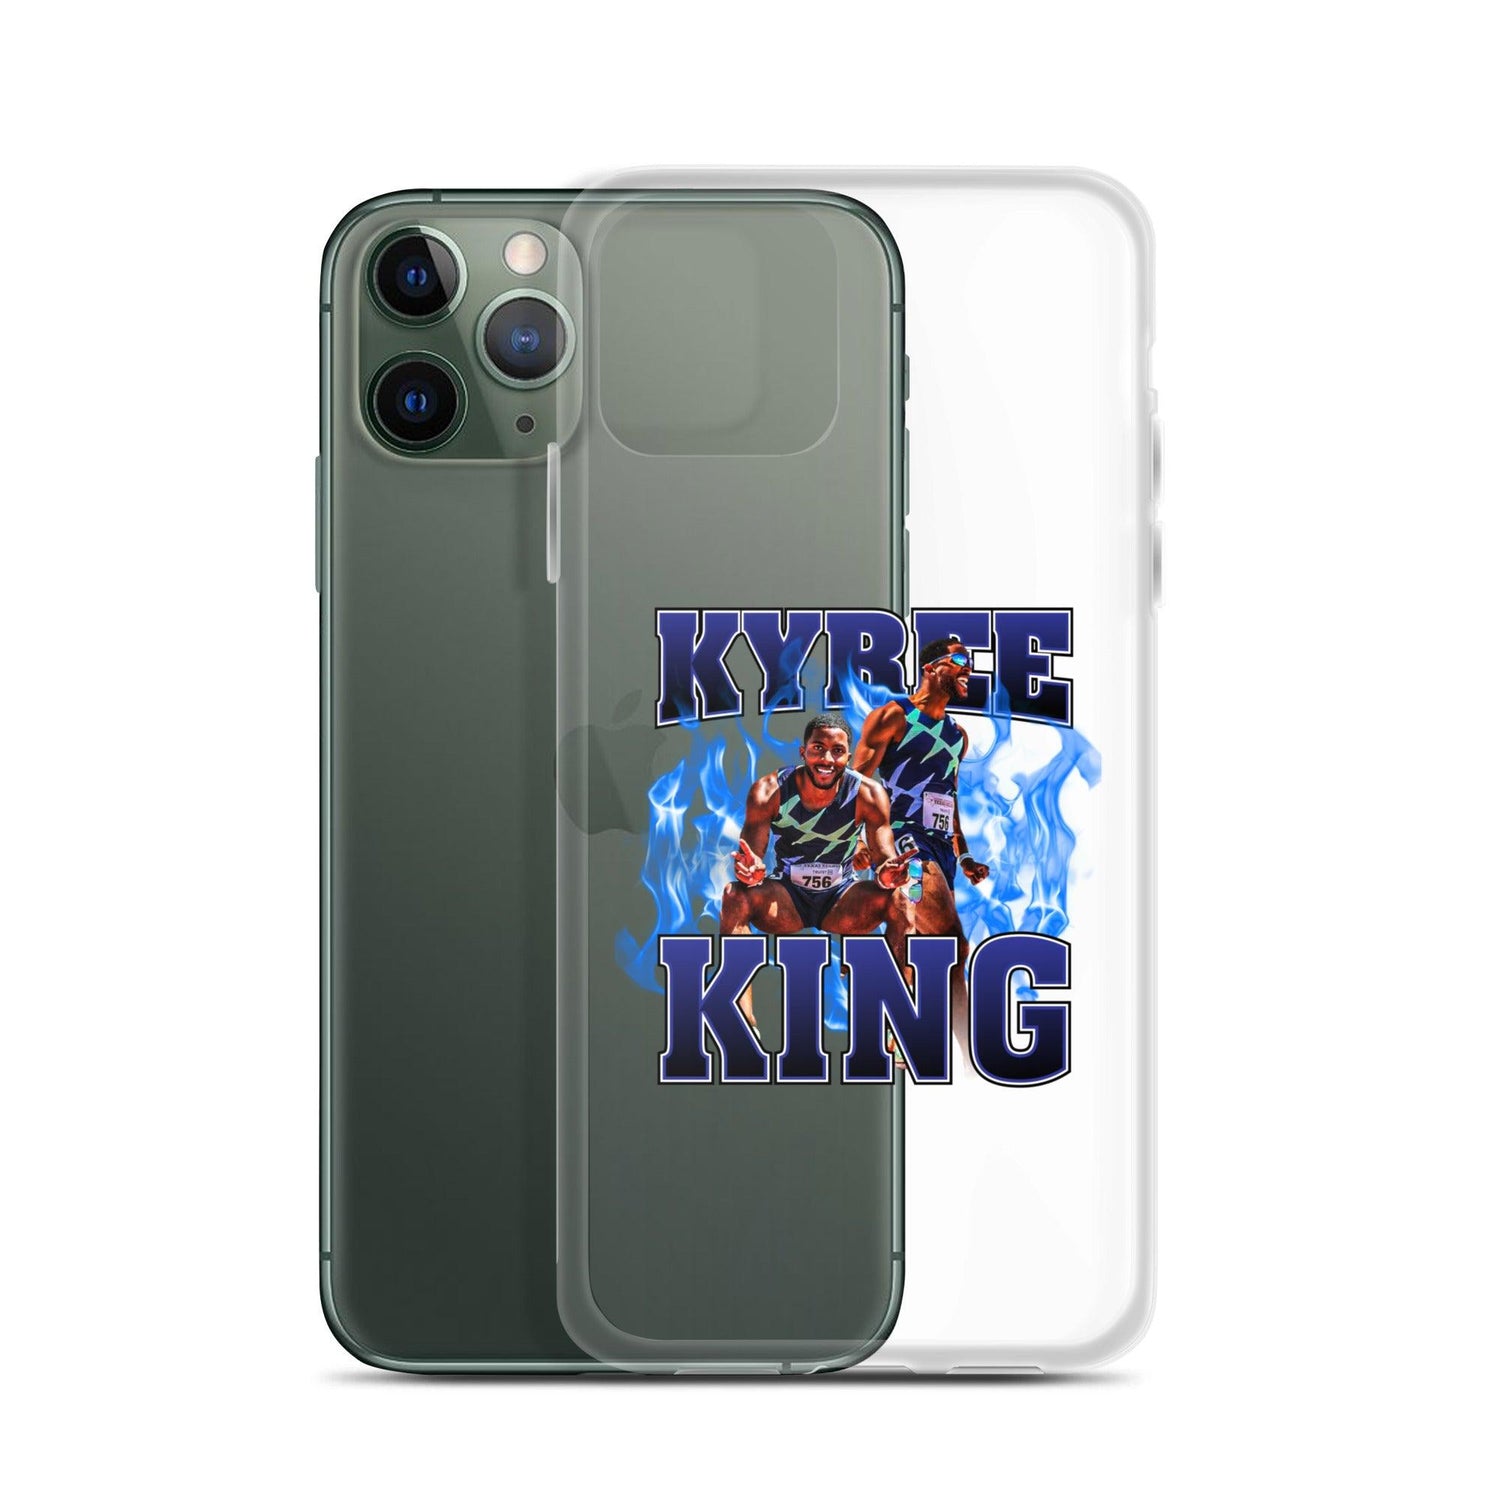 Kyree King “Essential” iPhone Case - Fan Arch